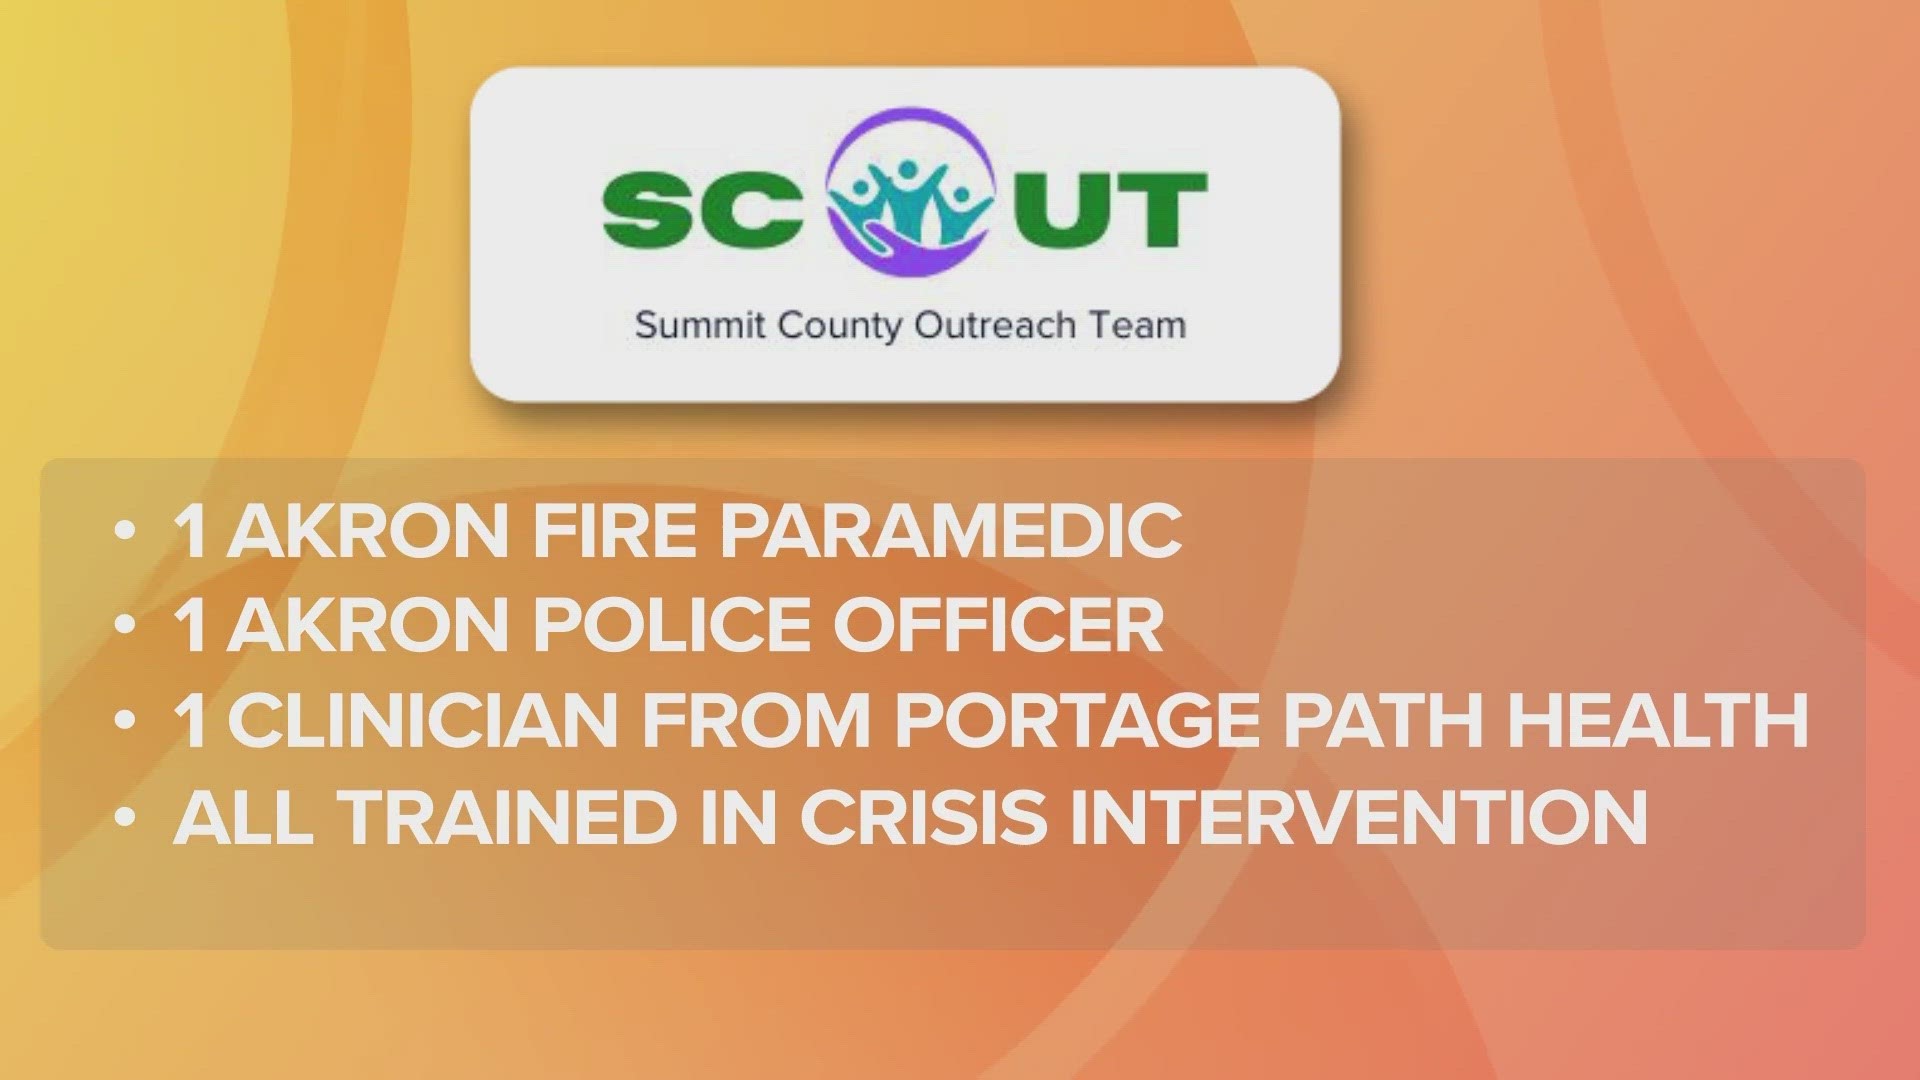 SCOUT, or the Summit County Outreach Team, will begin operations in early 2024.